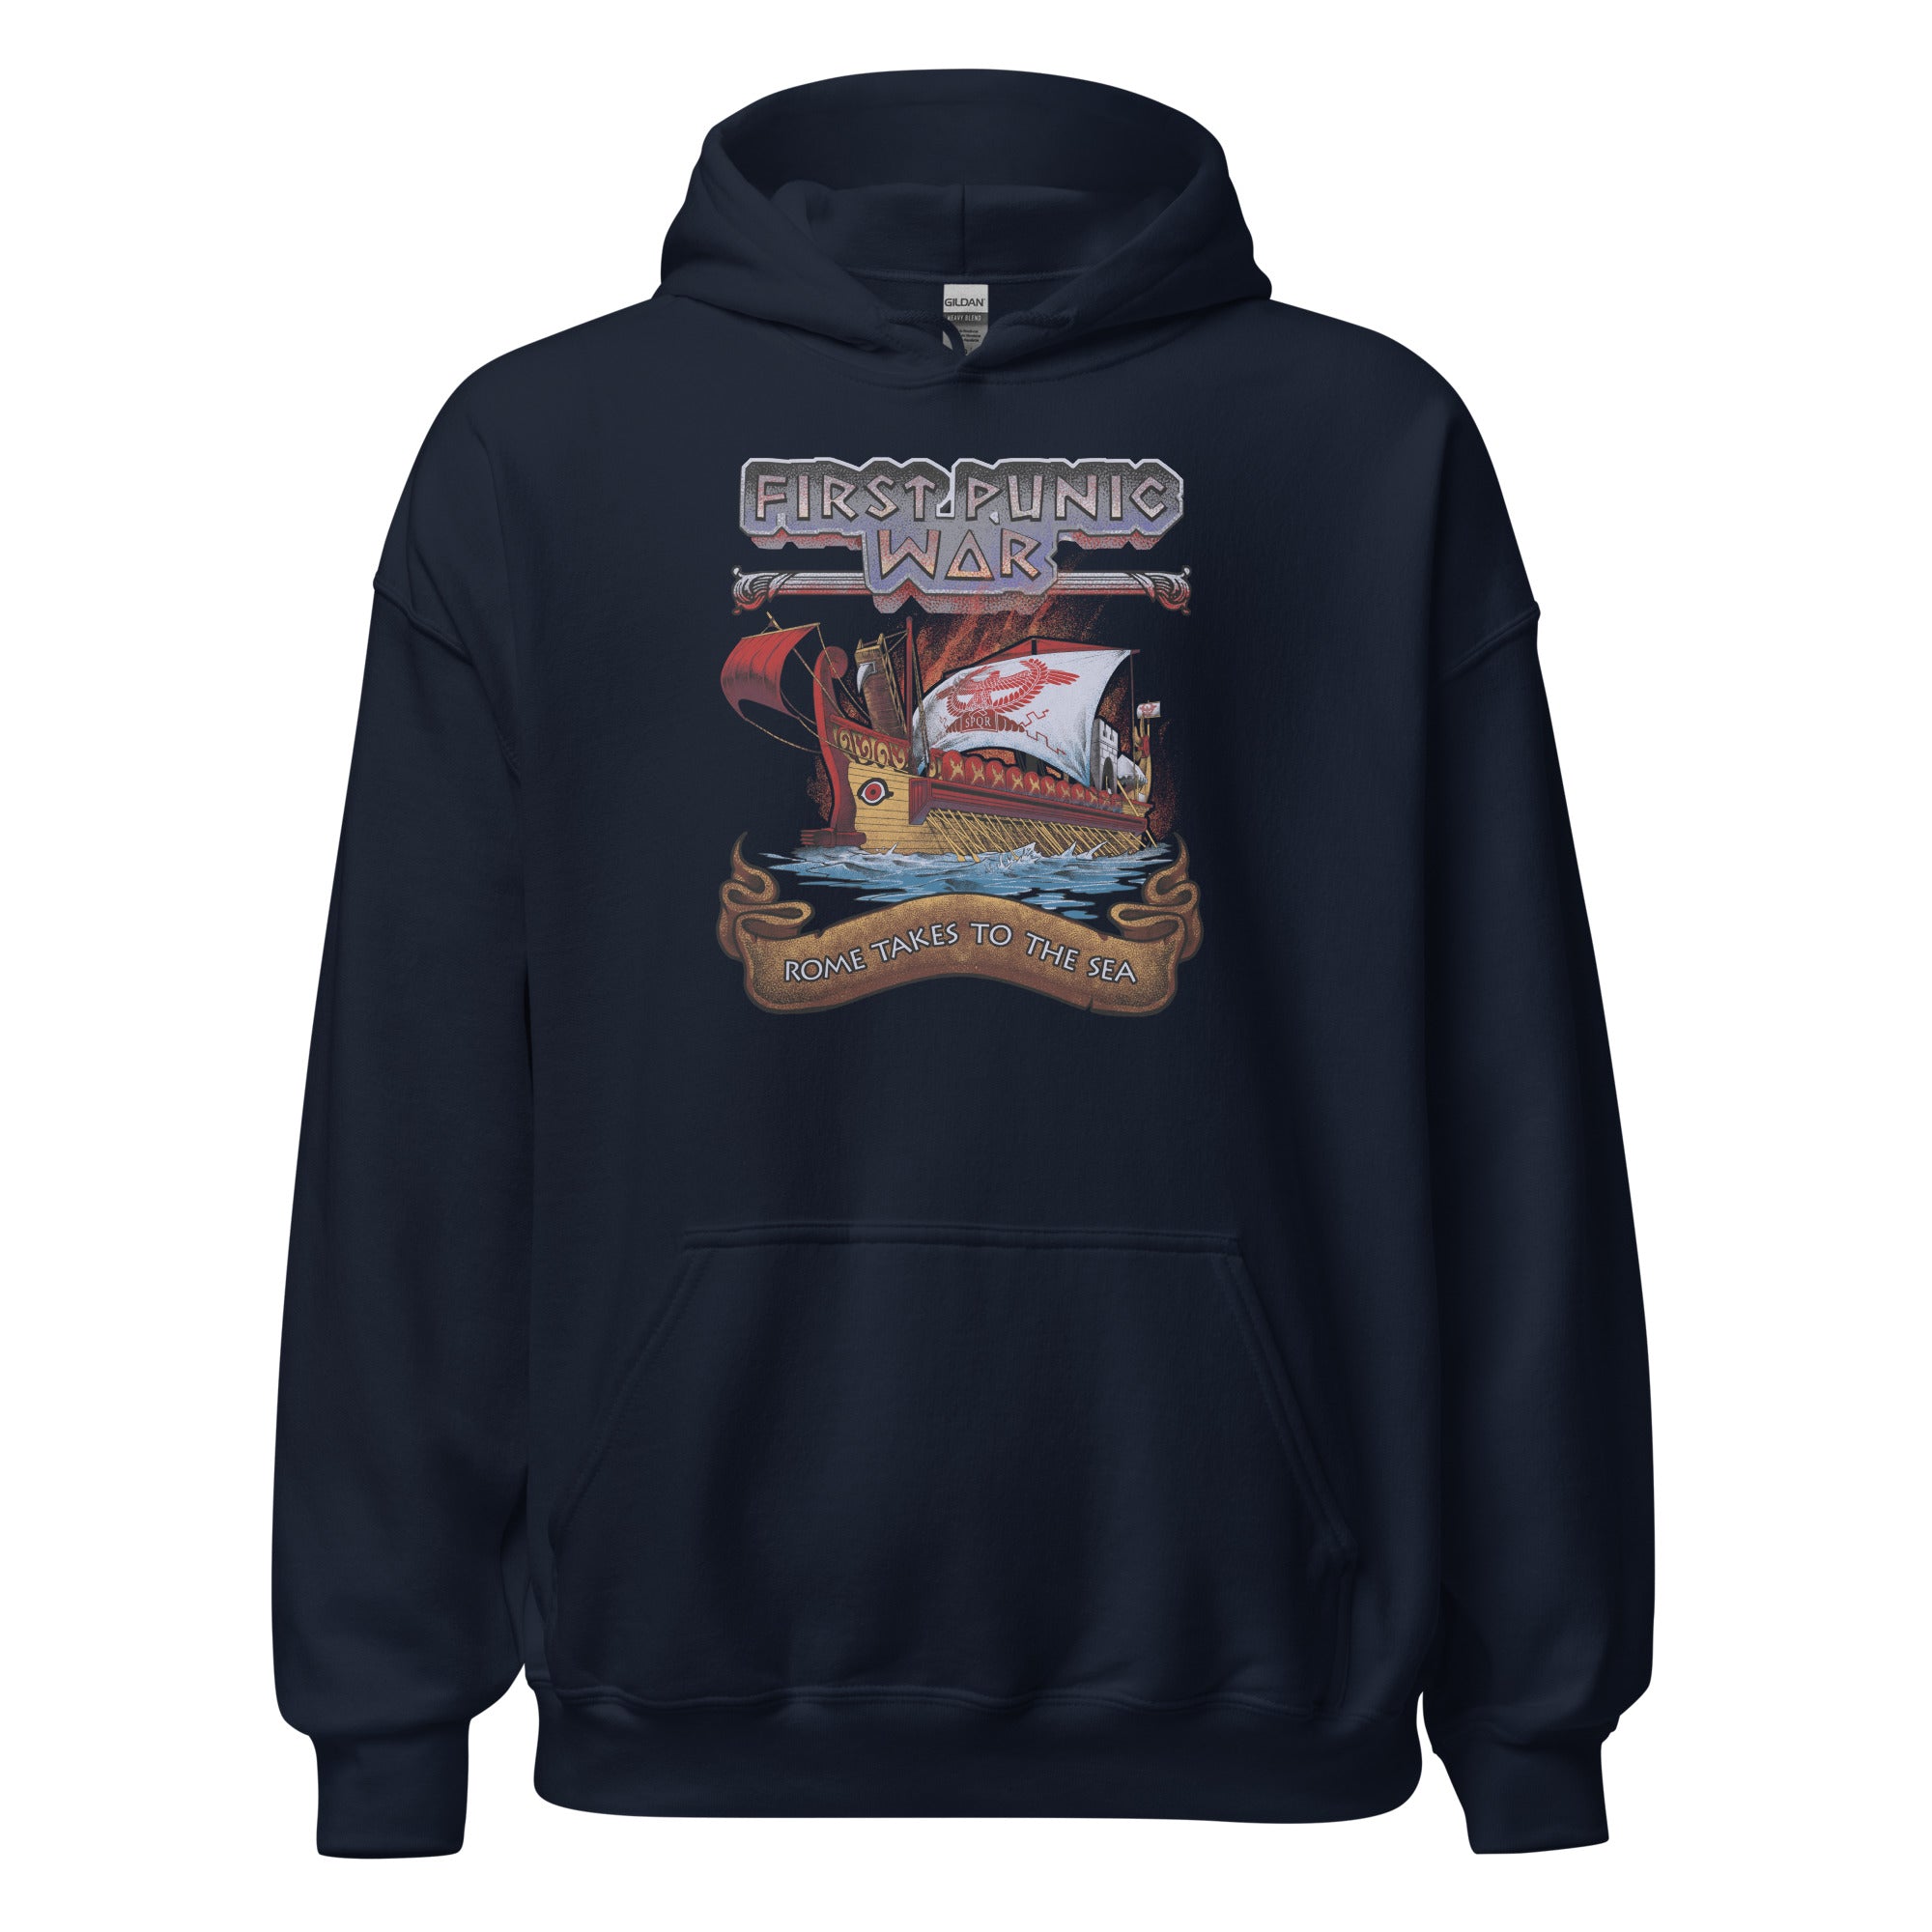 First Punic War - Rome Takes To The Sea - Naval History Unisex Hoodie